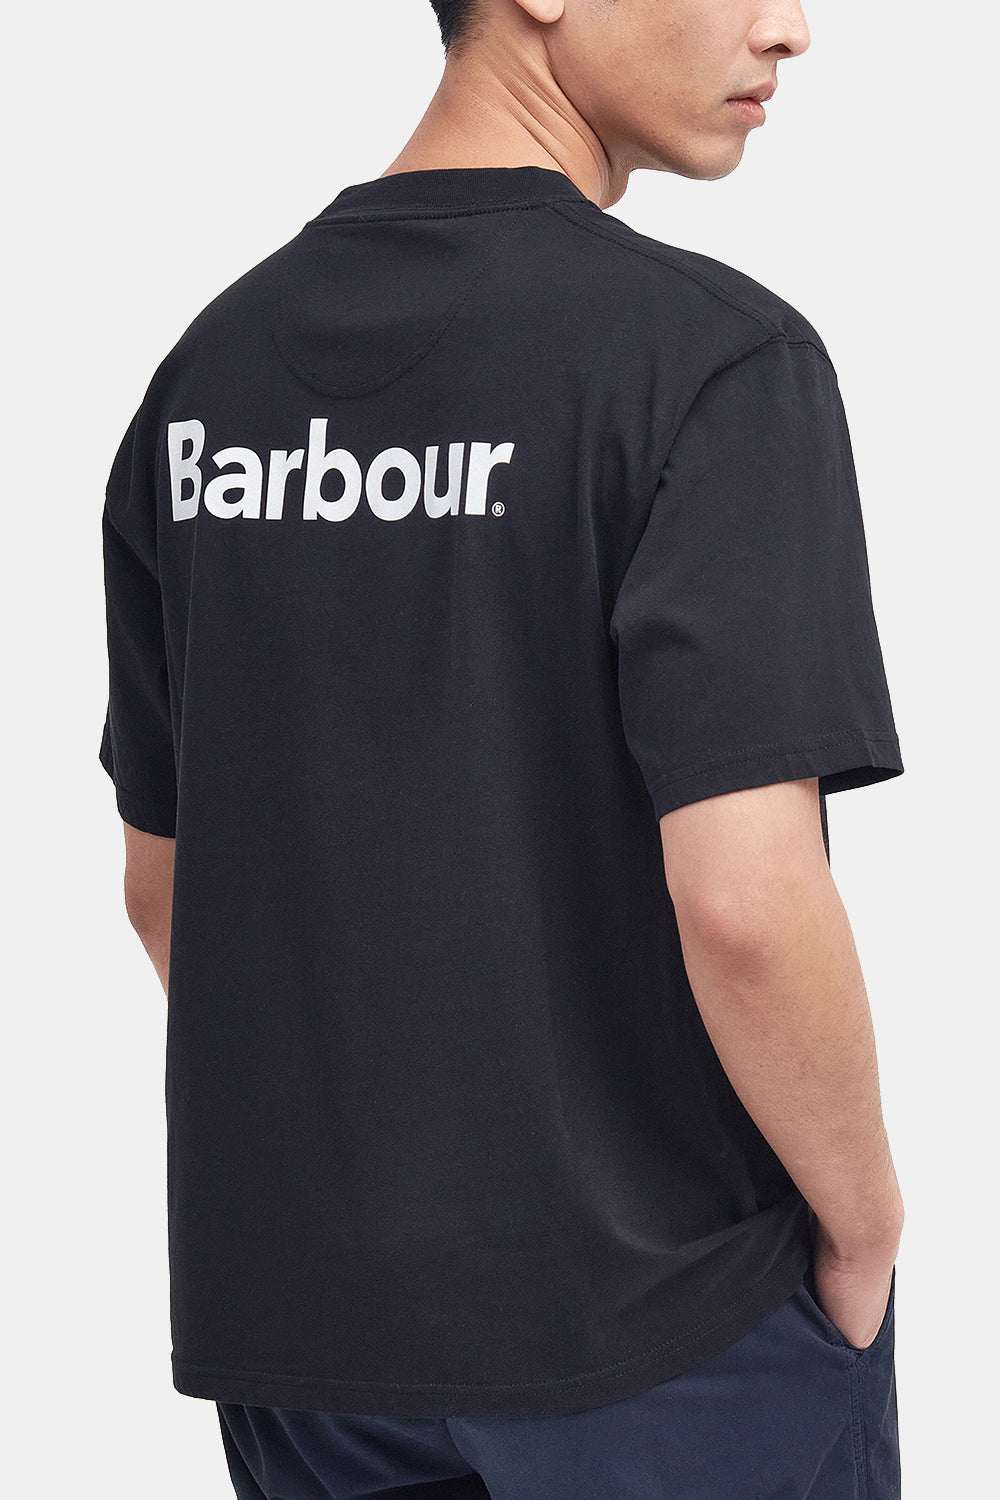 Barbour Stowell T-Shirt (Black)
